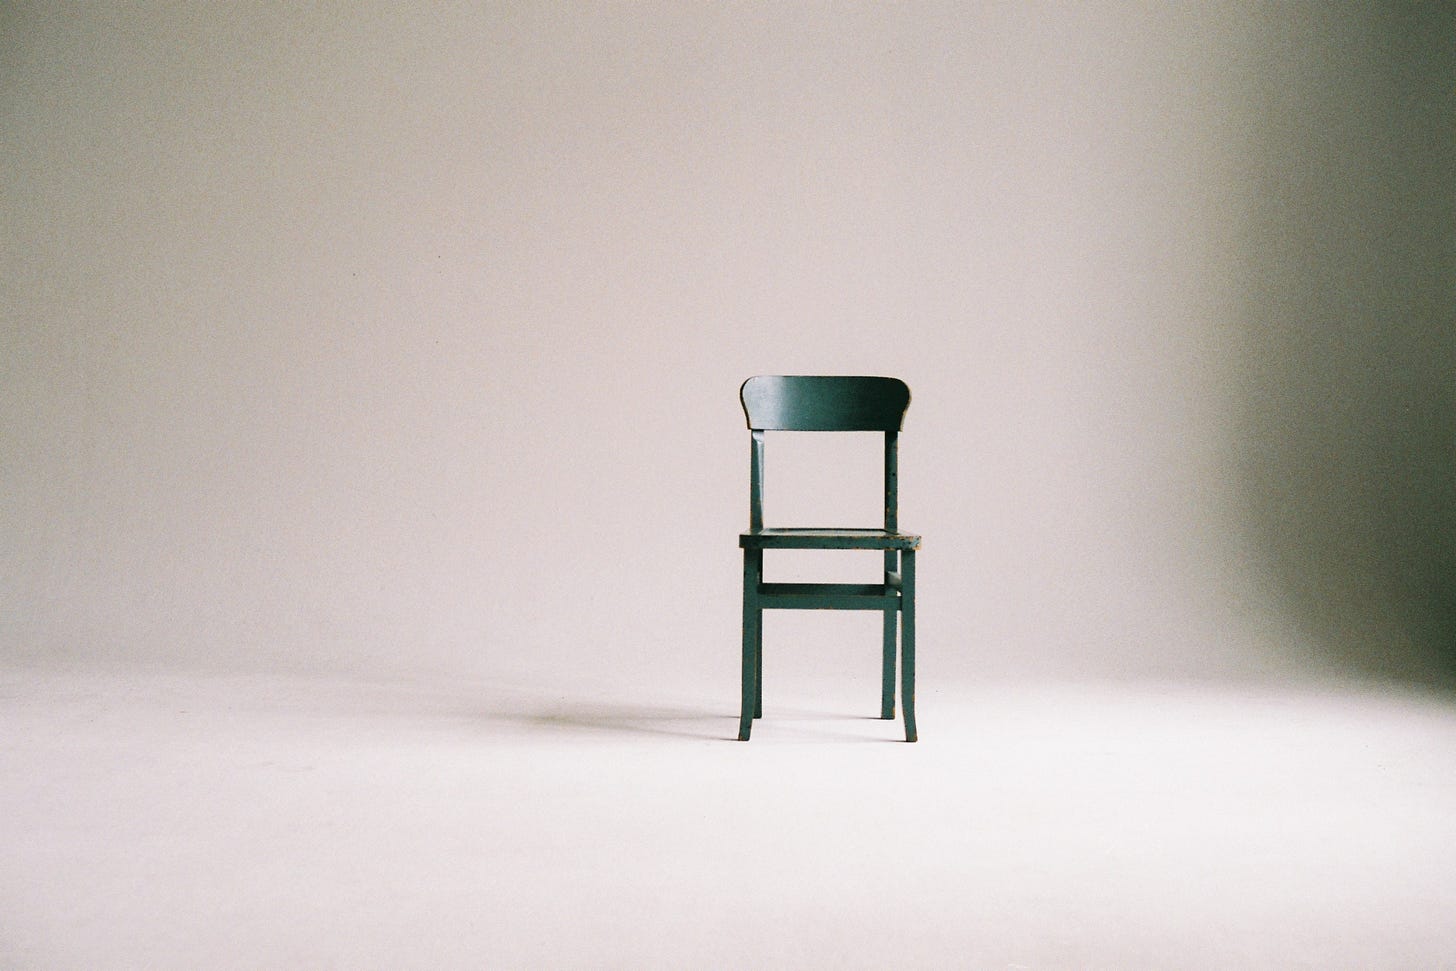 a green wooden chair sitting alone in a white room